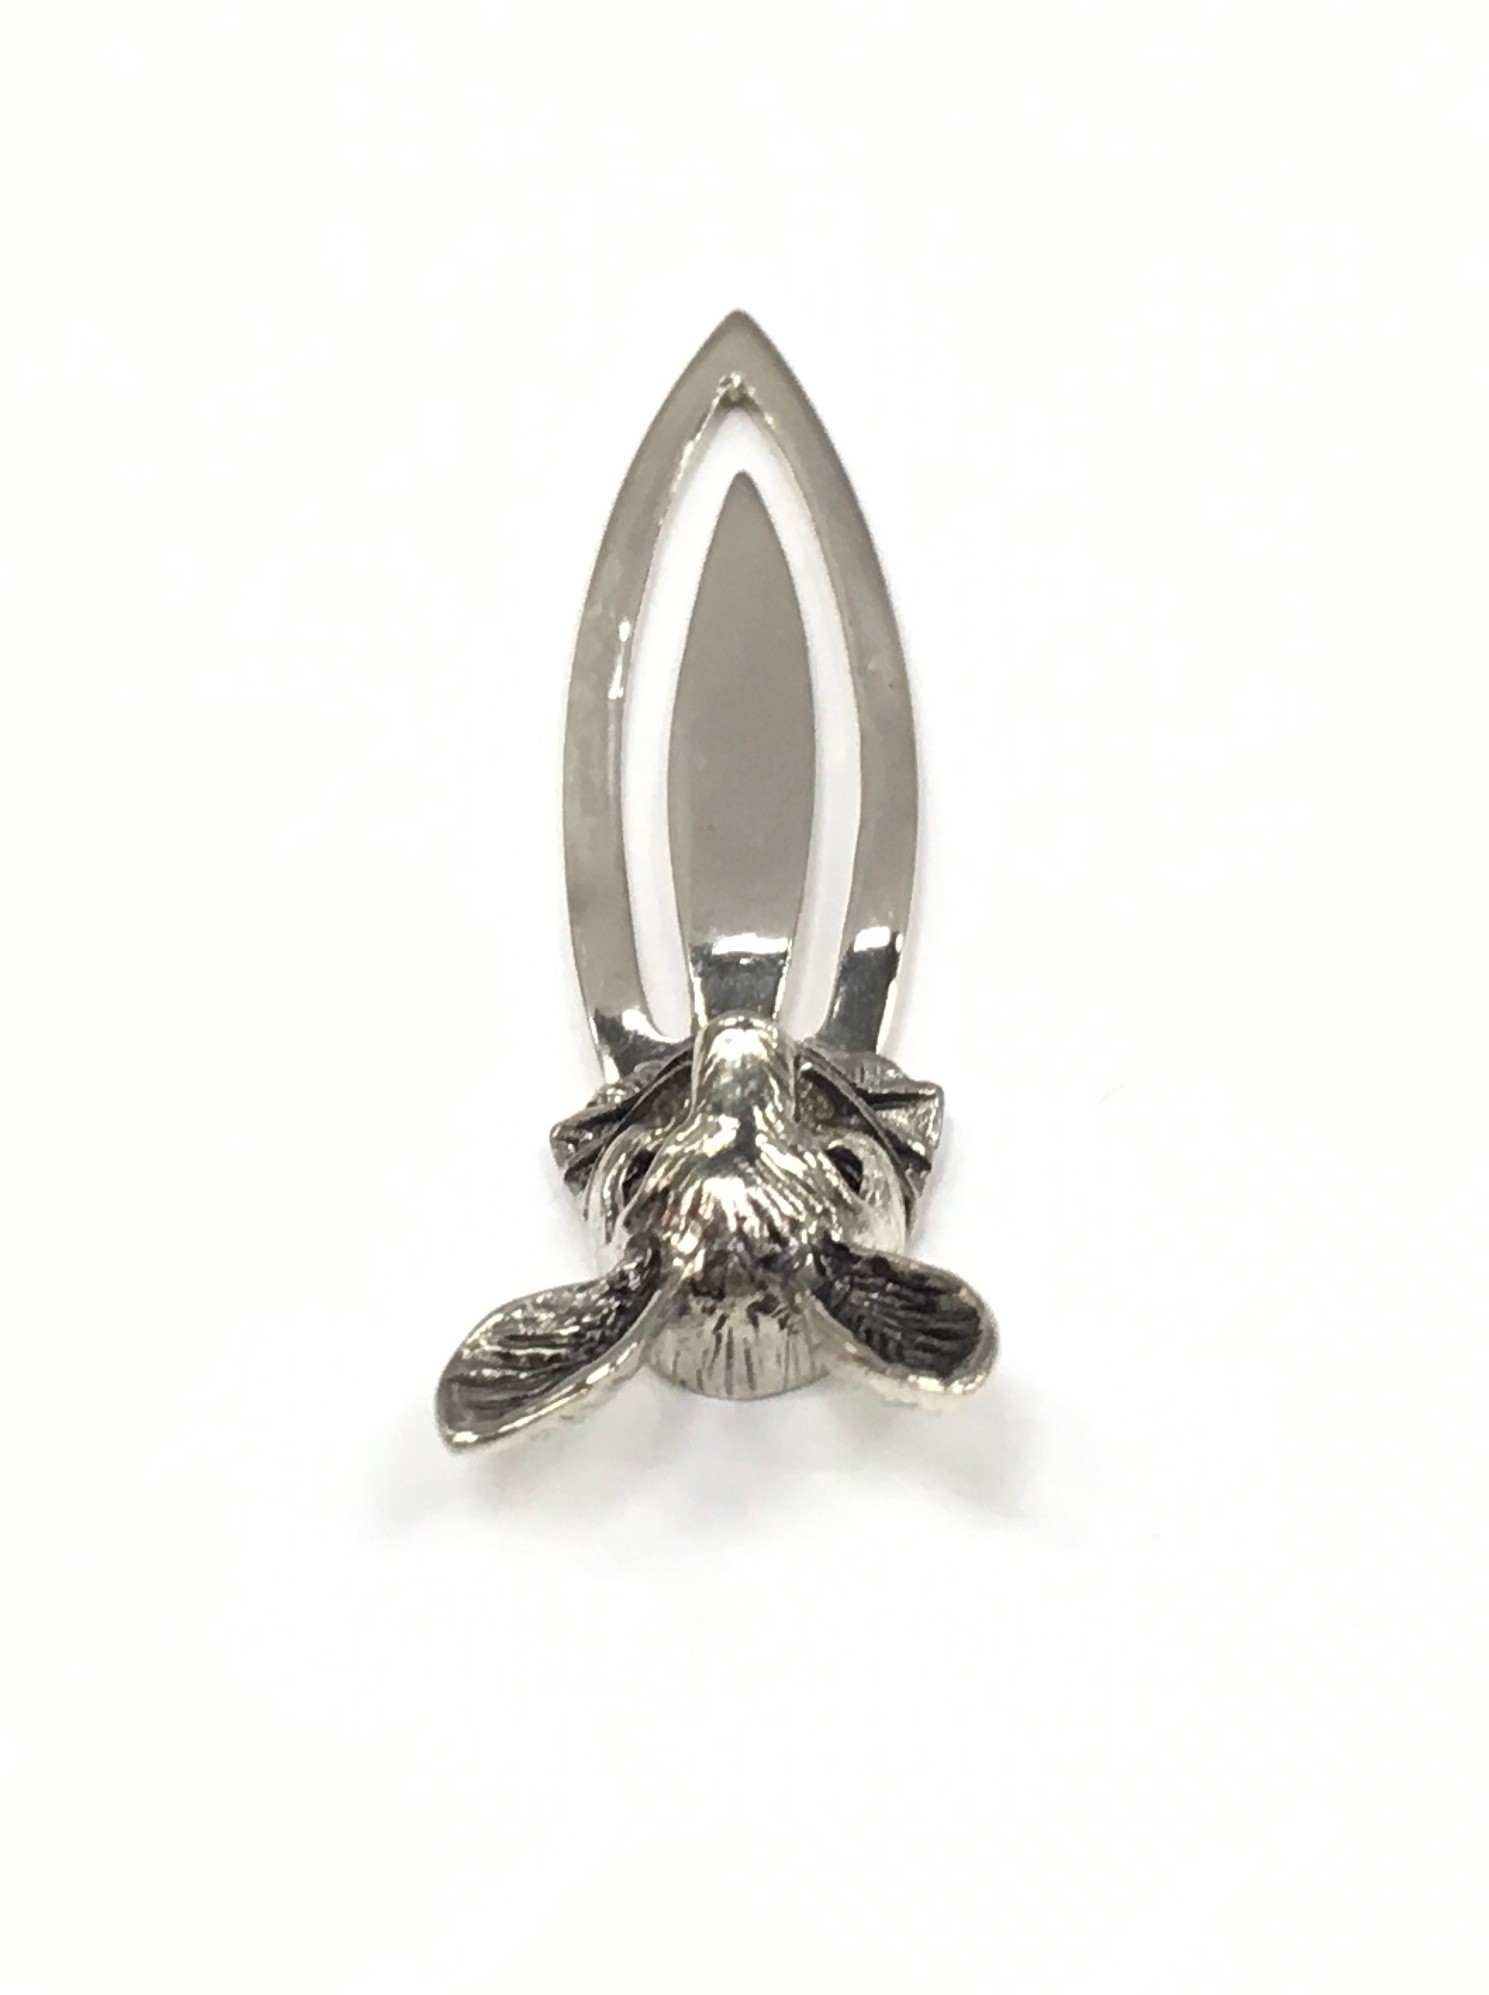 A silver bookmark with rabbit finial. - Image 3 of 4